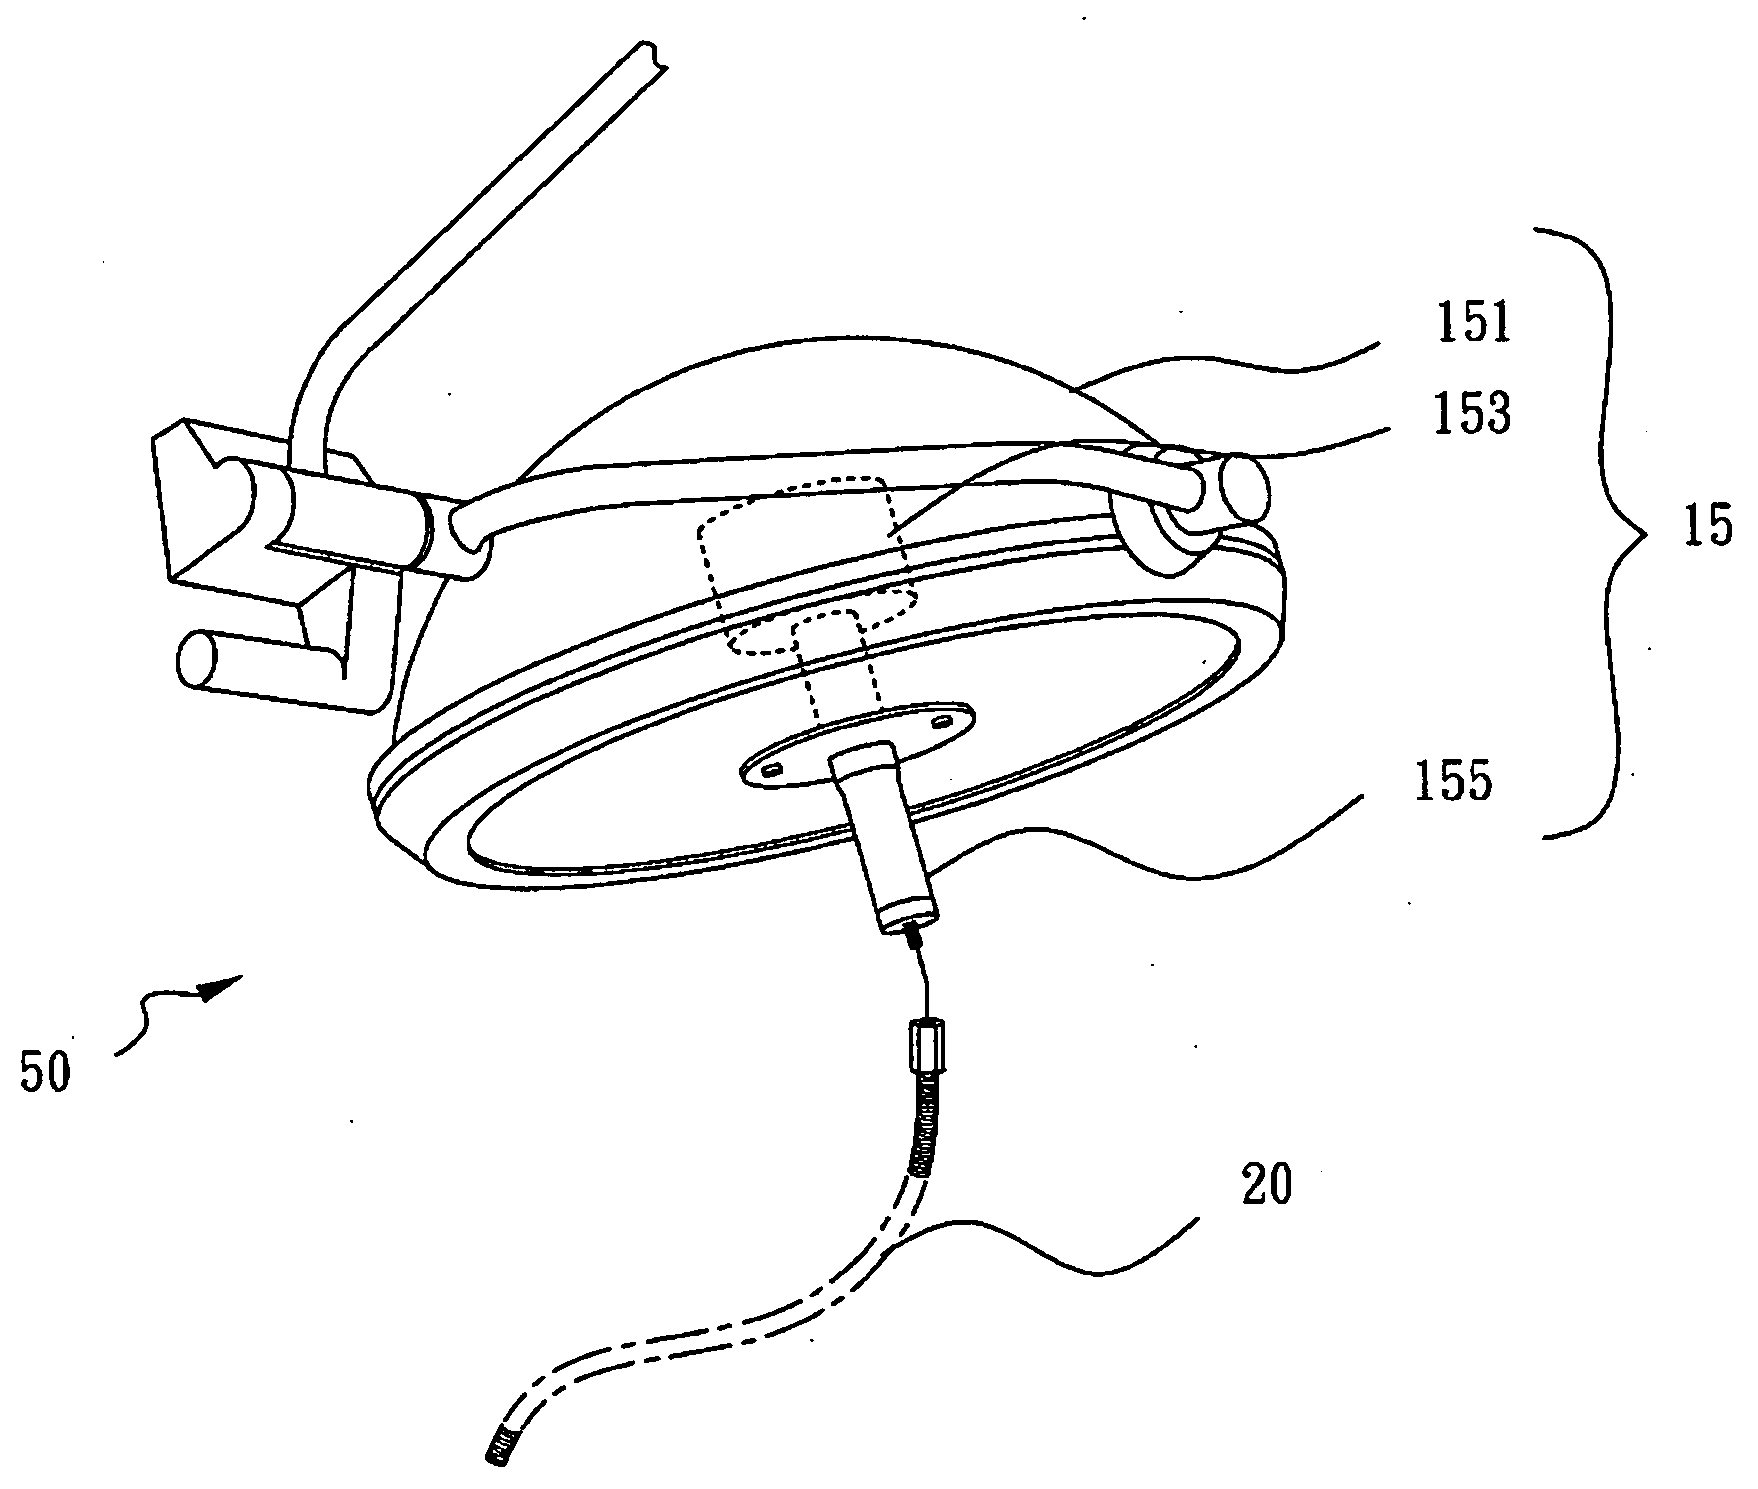 Surgical Lighting System and Surgical Light with Image-Recording Function